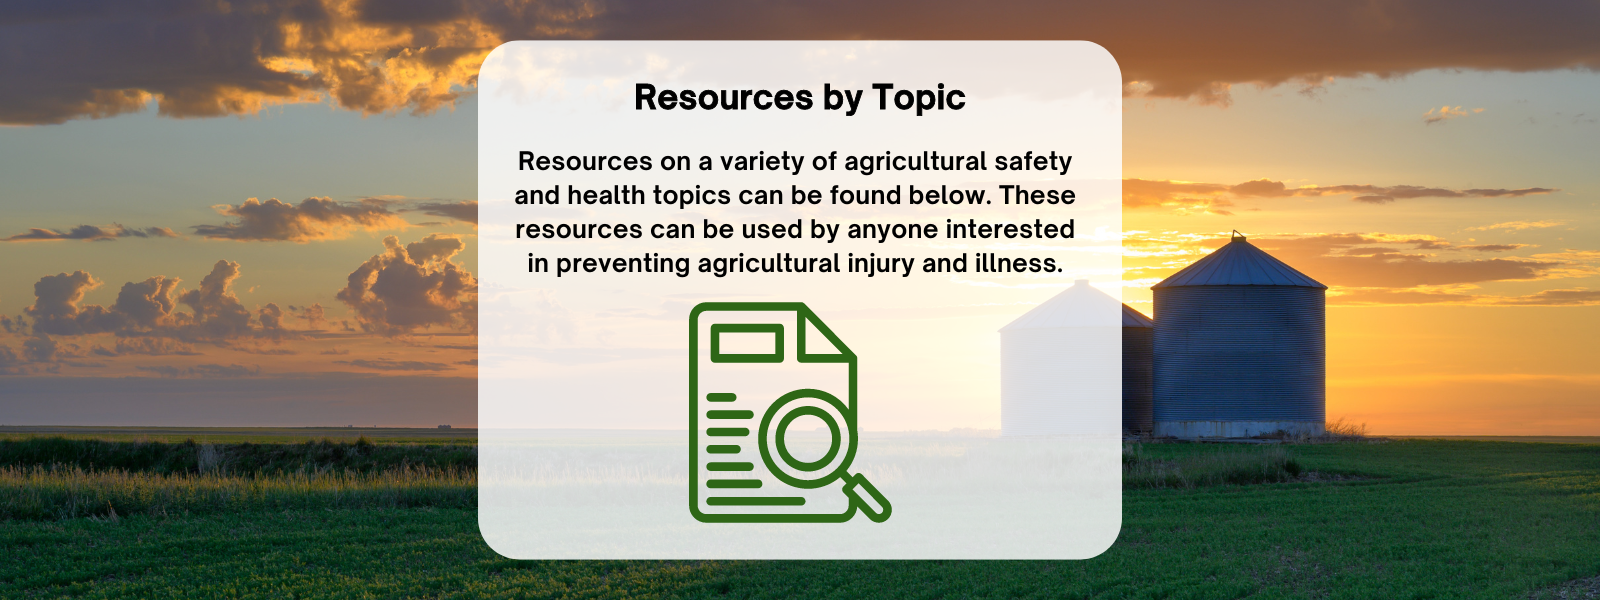 Resources by Topic. Resources on a variety of agricultural safety and health topics can be found below. These resources can be used by anyone interested in preventing agricultural injury and illness